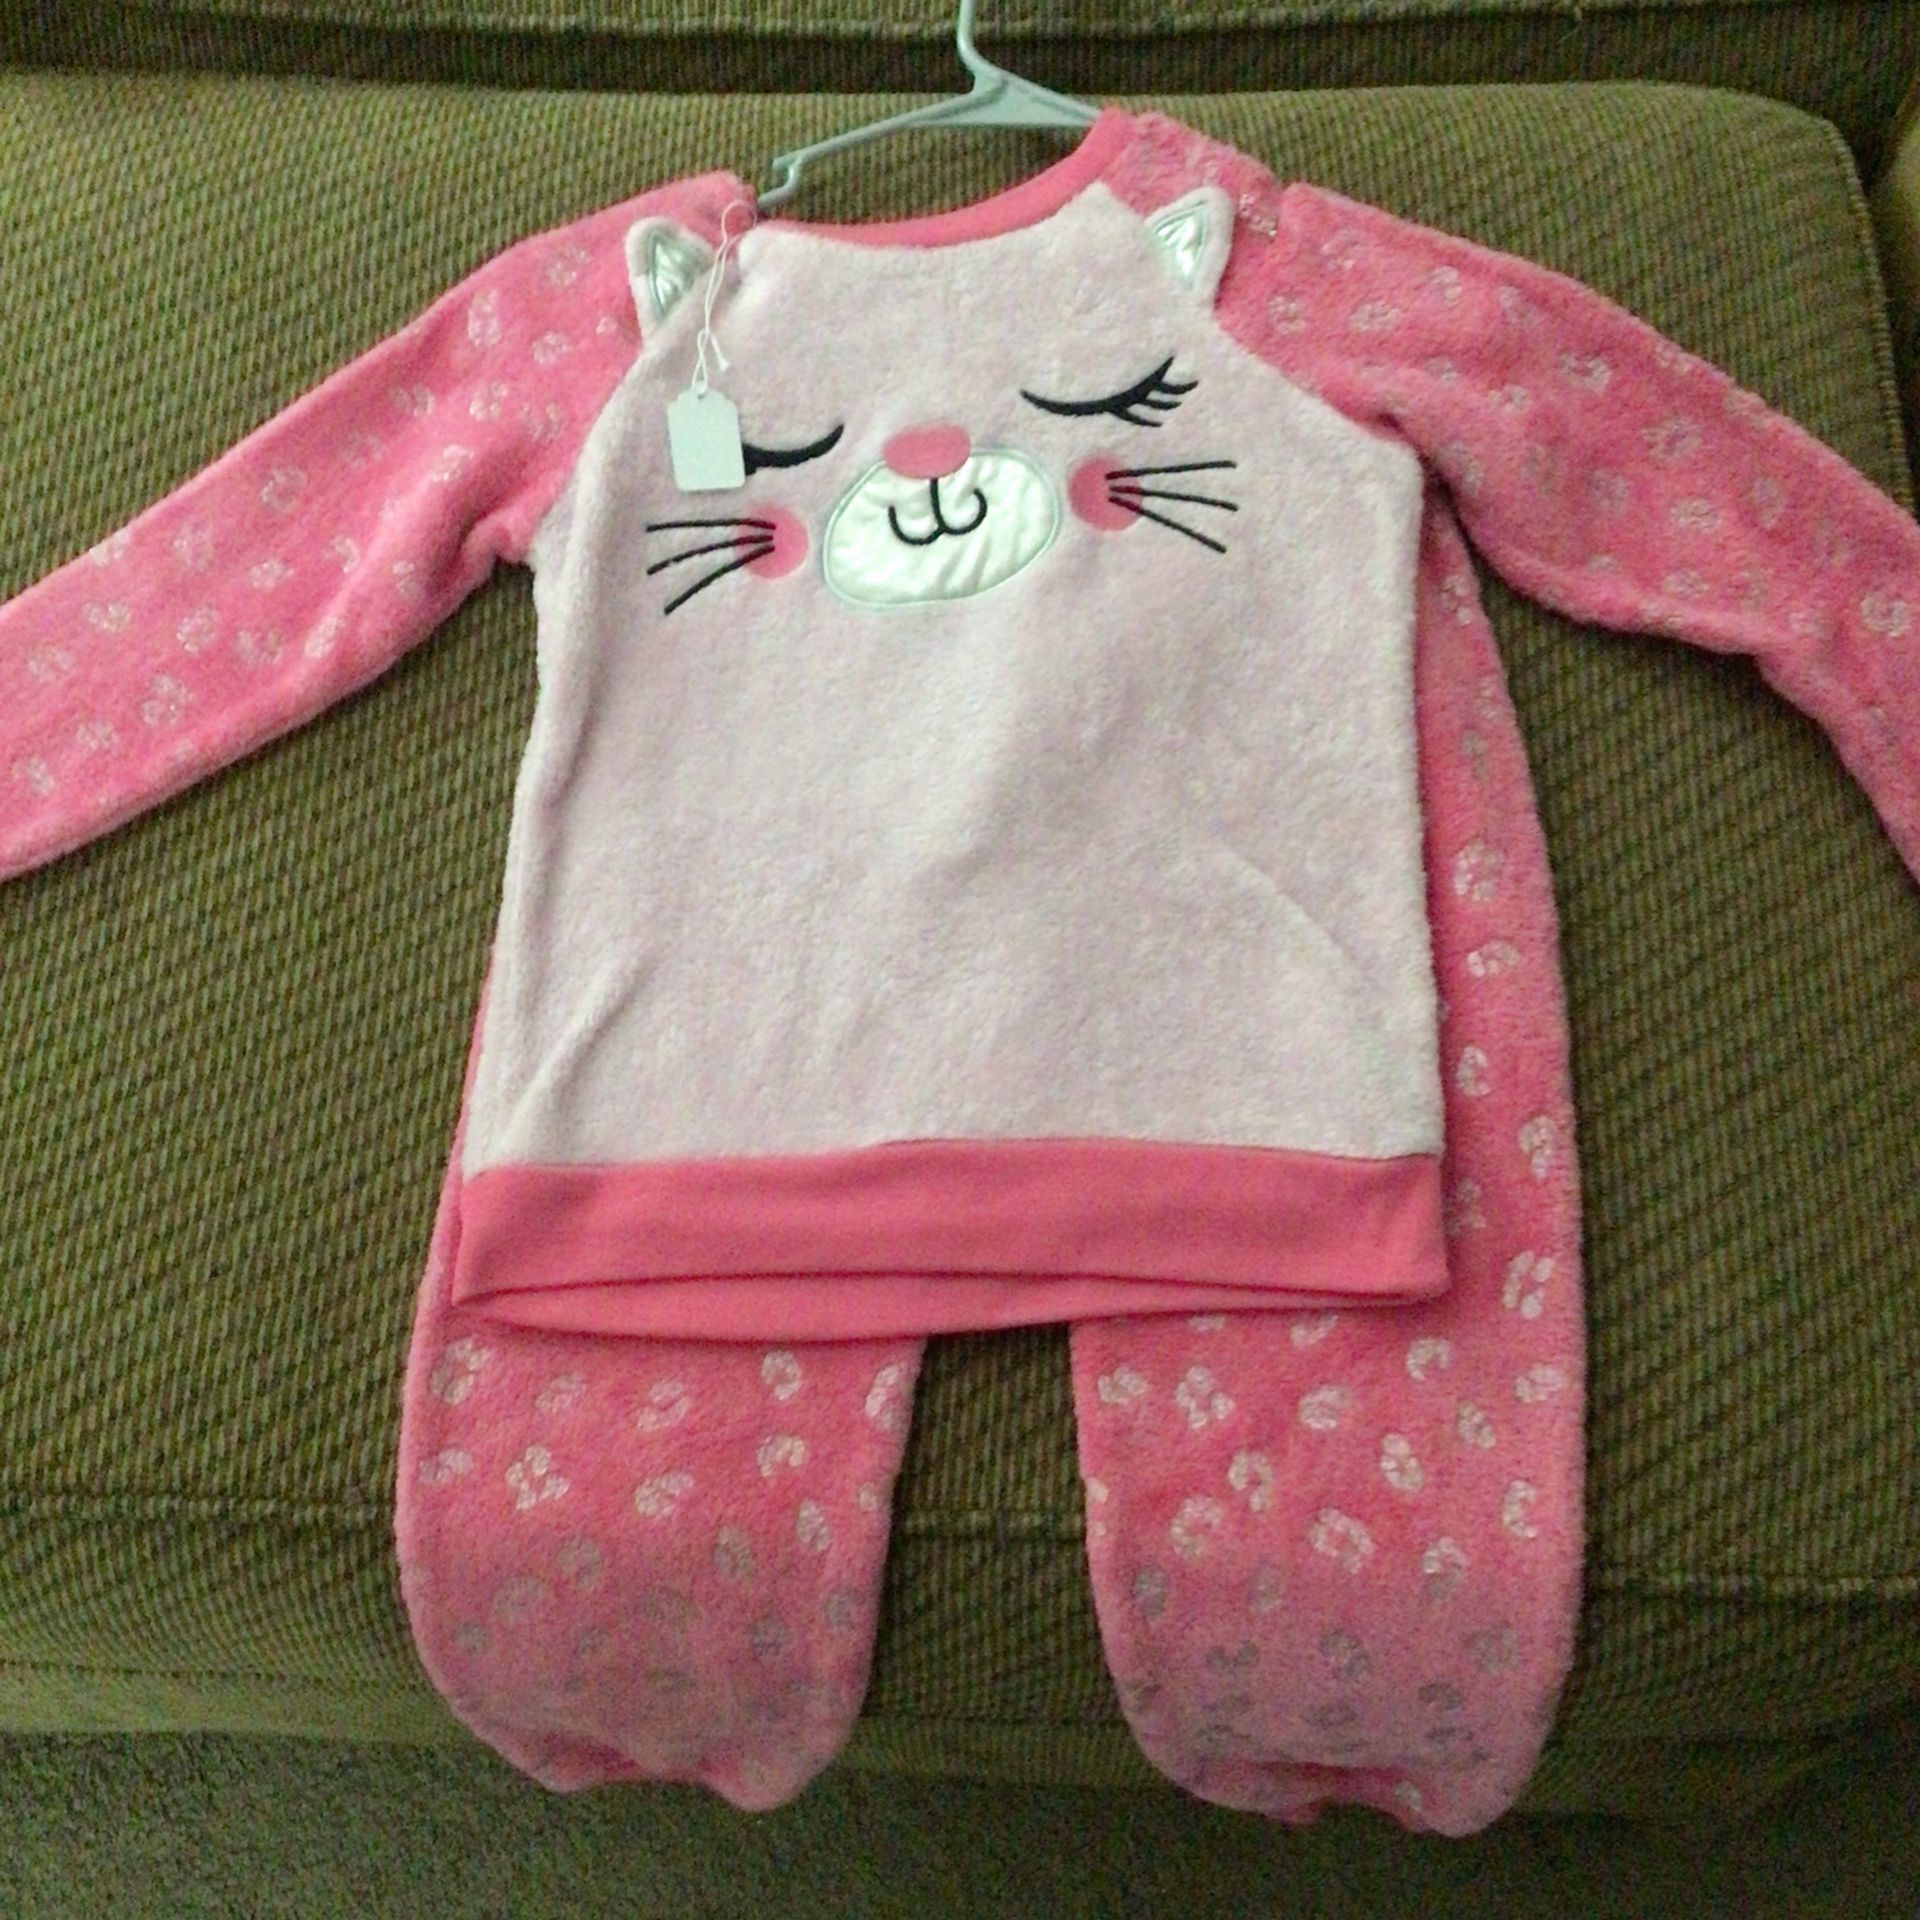 Girls 7/8 Pajamas $10 Available For Pick Up 